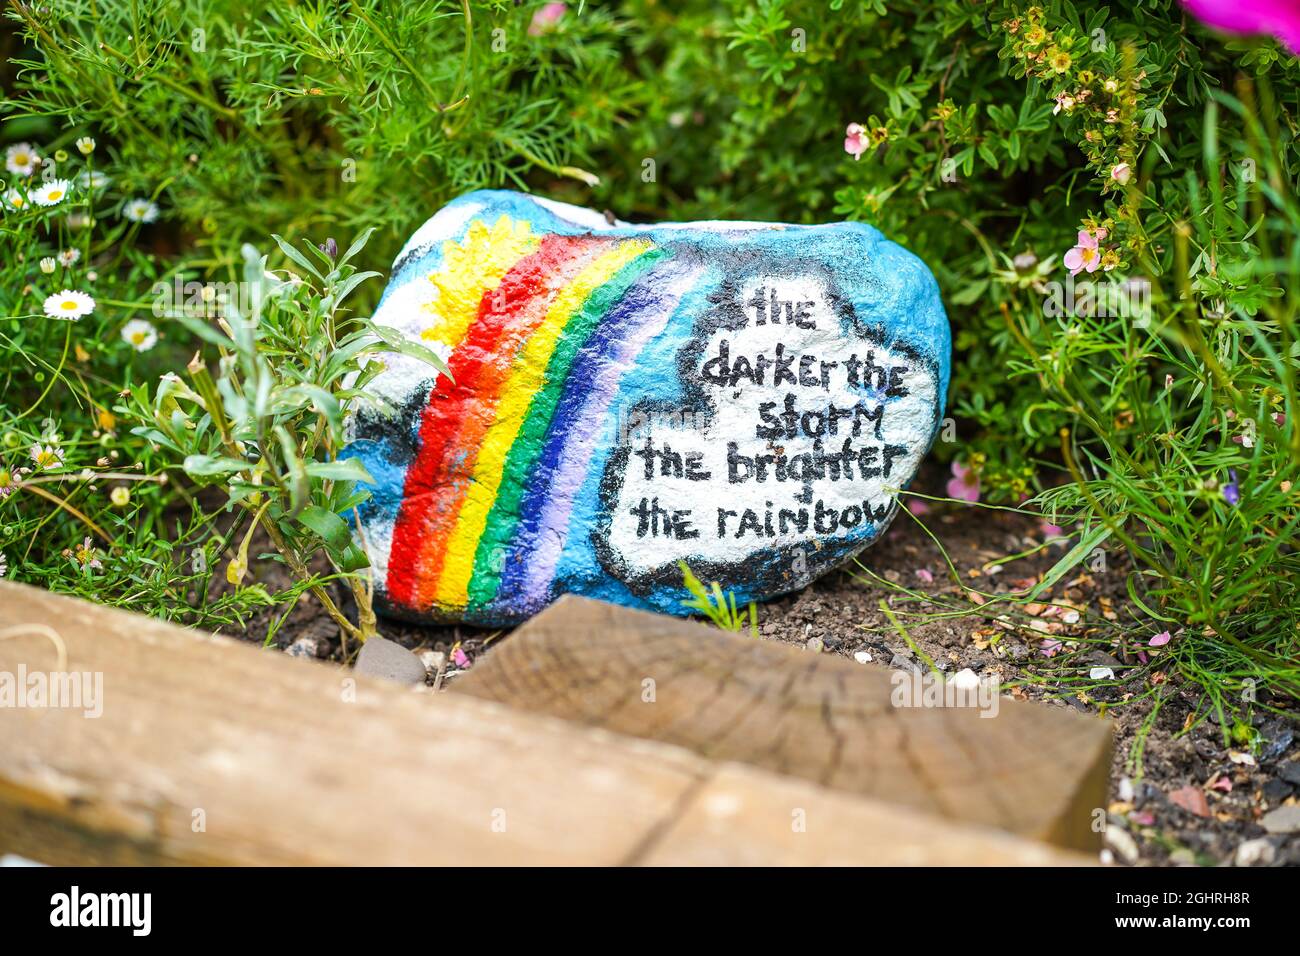 'The darker the storm the greater the rainbow' - sign painted on a garden stone for passersby to read & engage in positive thinking, mindset, attitude. Stock Photo